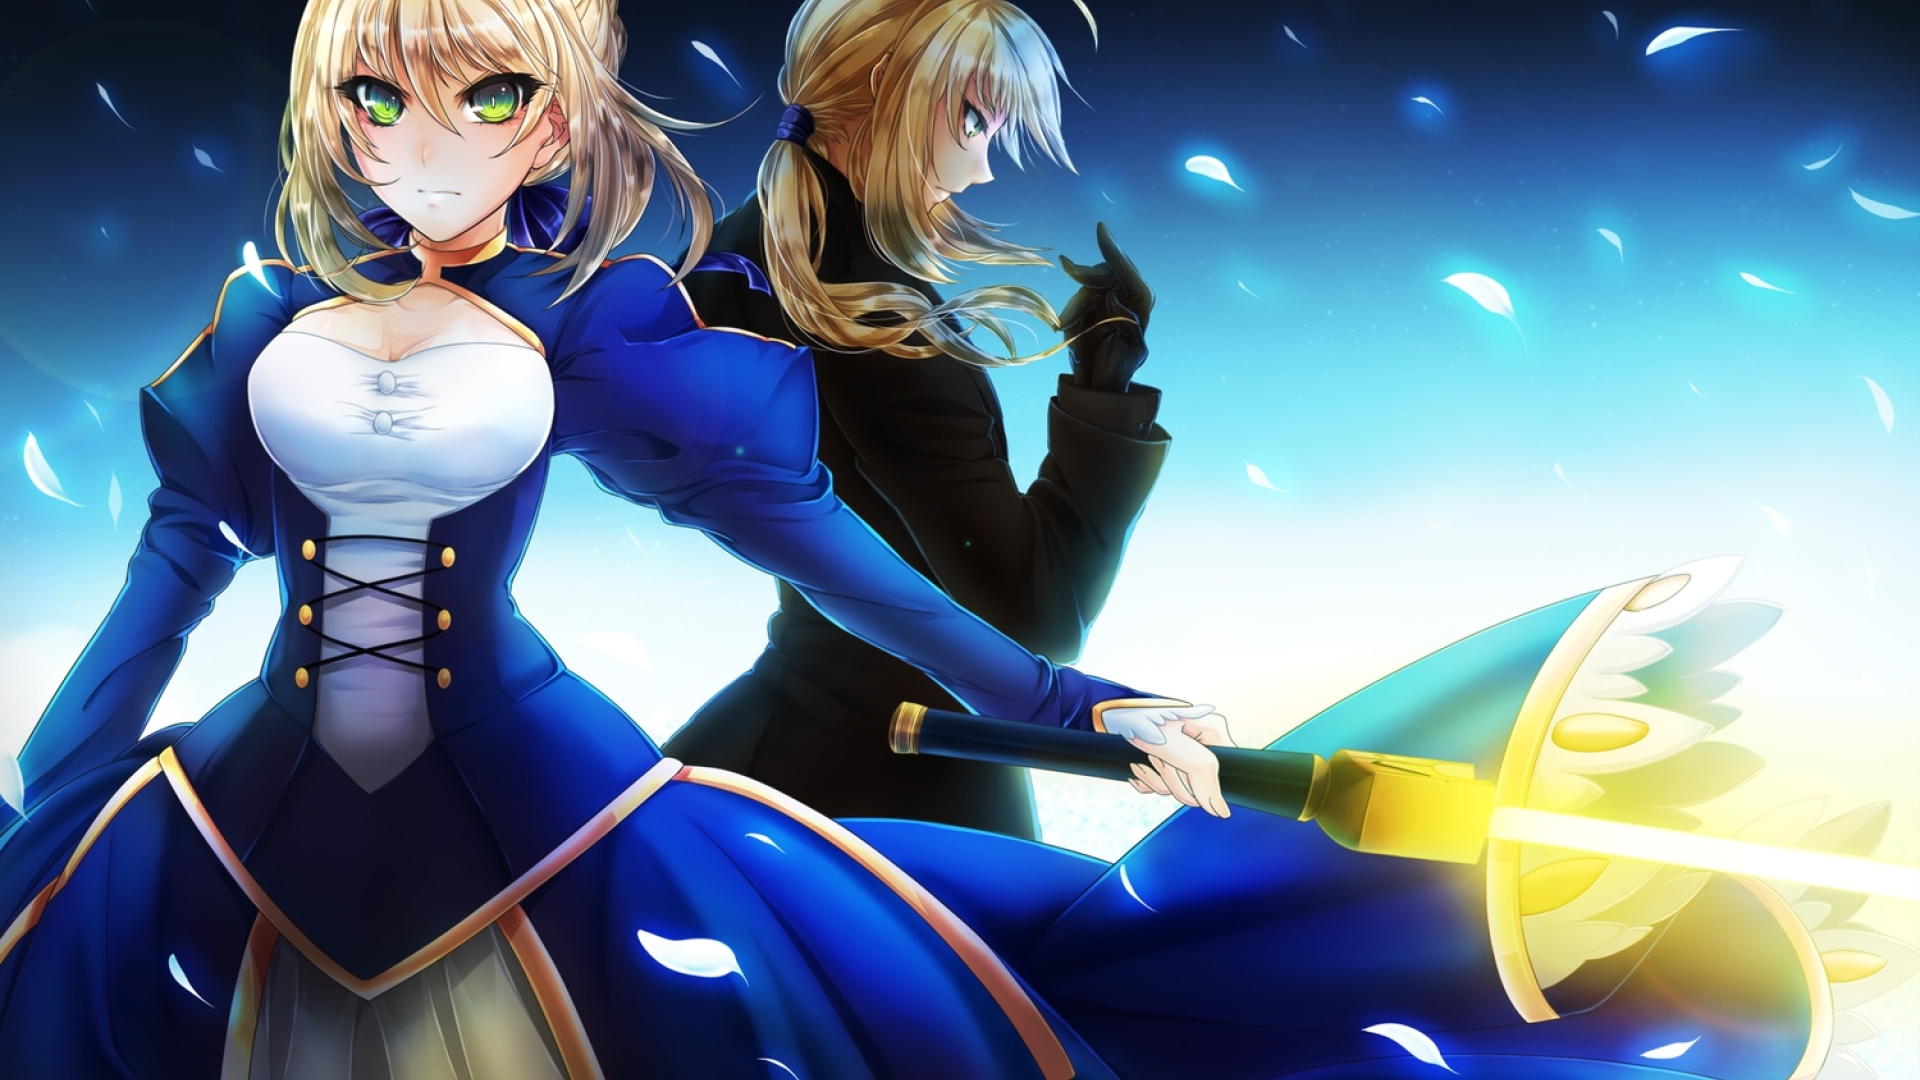 19x1080 Fate Stay Night Fate Zero Saber Girl 1080p Laptop Full Hd Wallpaper Hd Anime 4k Wallpapers Images Photos And Background